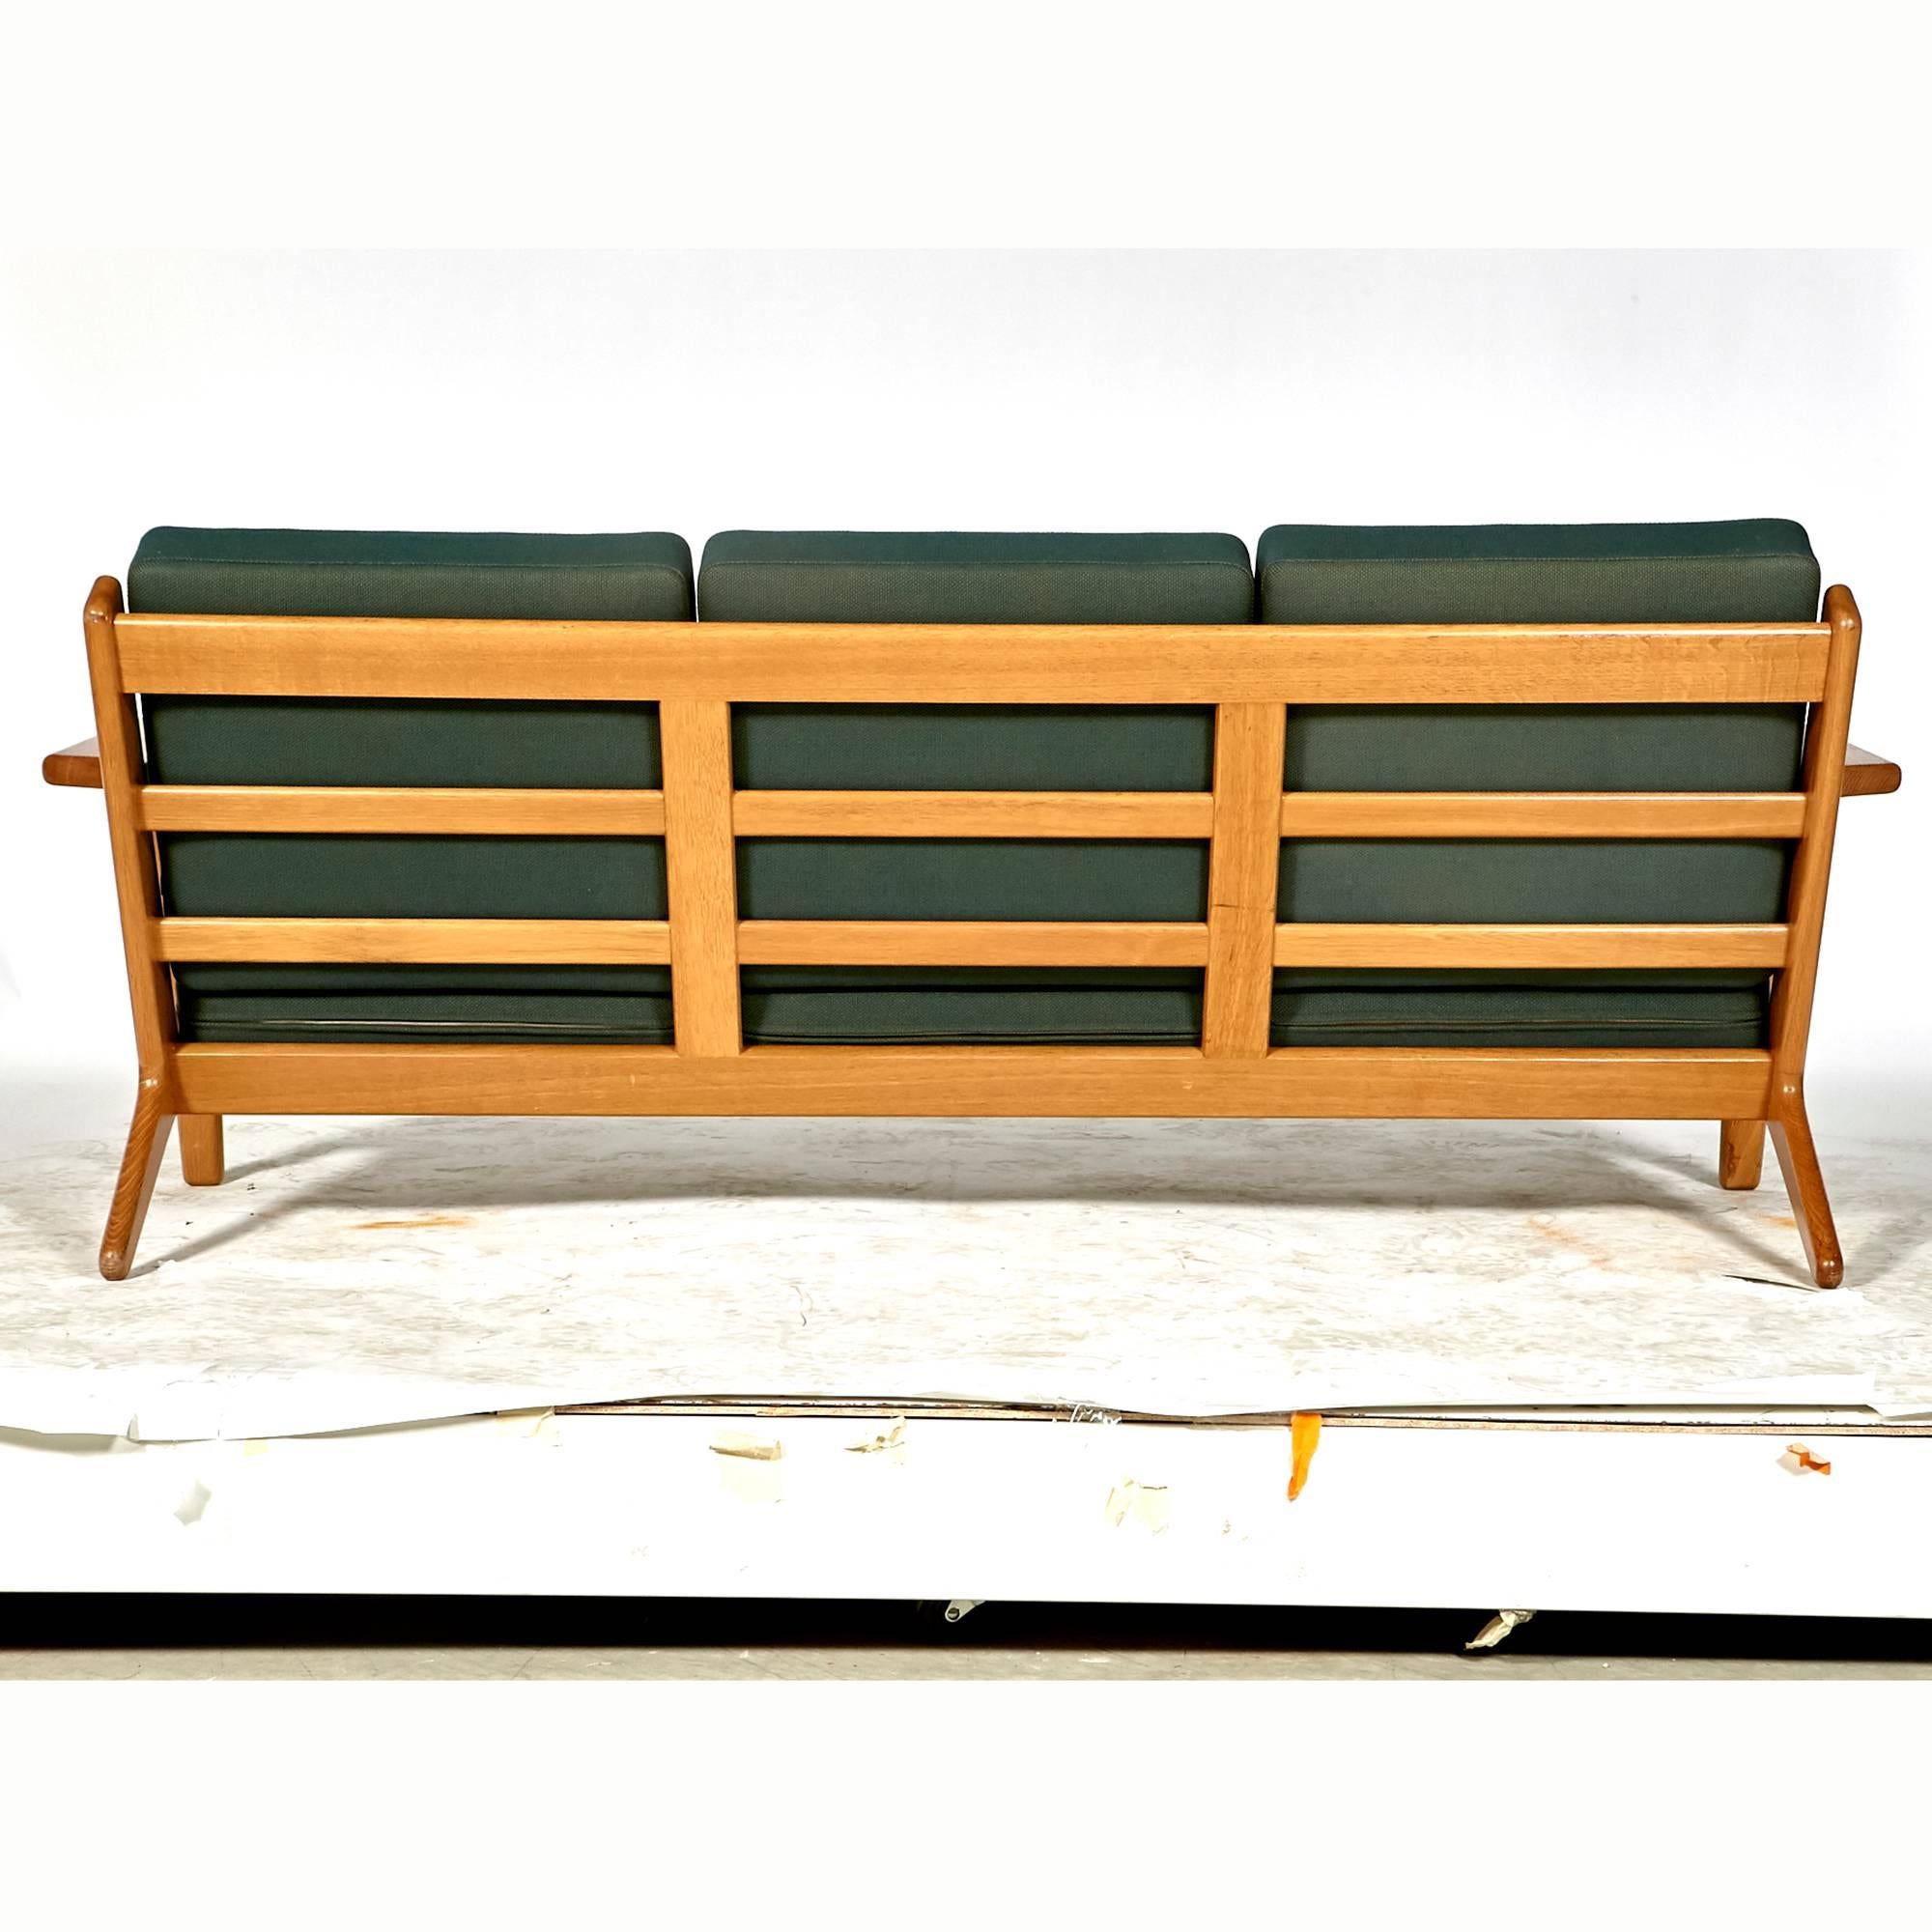 Hans J. Wegner Three-Seat Sofa in Oak for GETAMA, Denmark, GE-290 In Excellent Condition For Sale In Amherst, NH